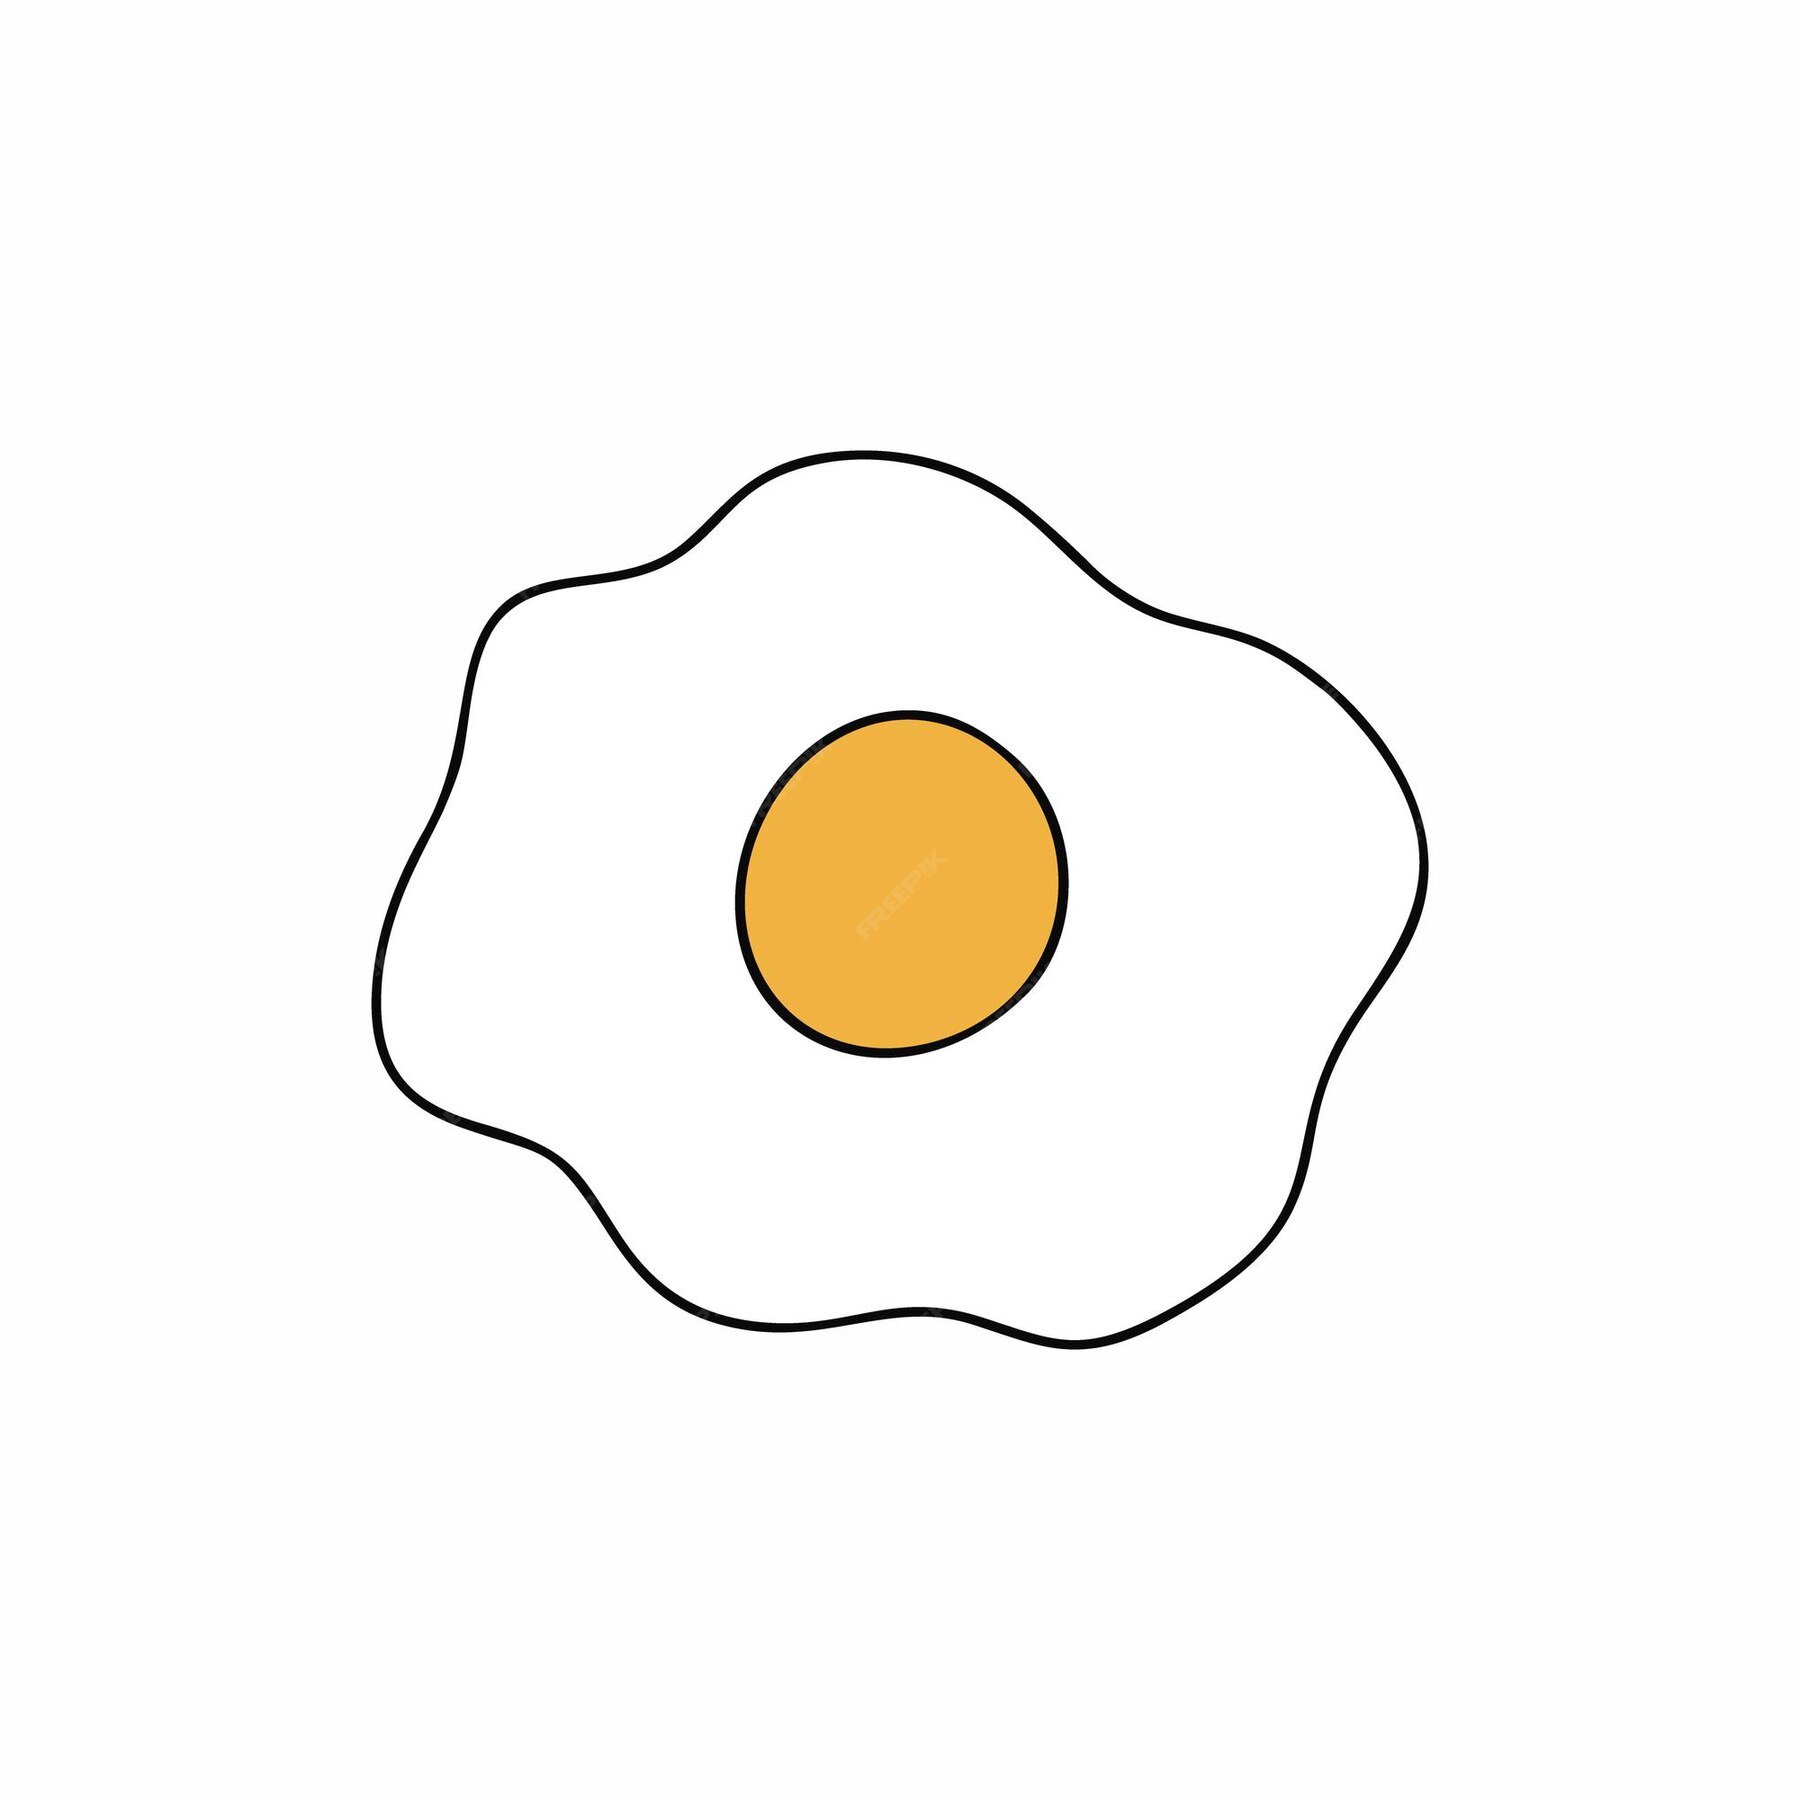 Premium Vector Scrambled eggs with yolk handdrawn in the style of